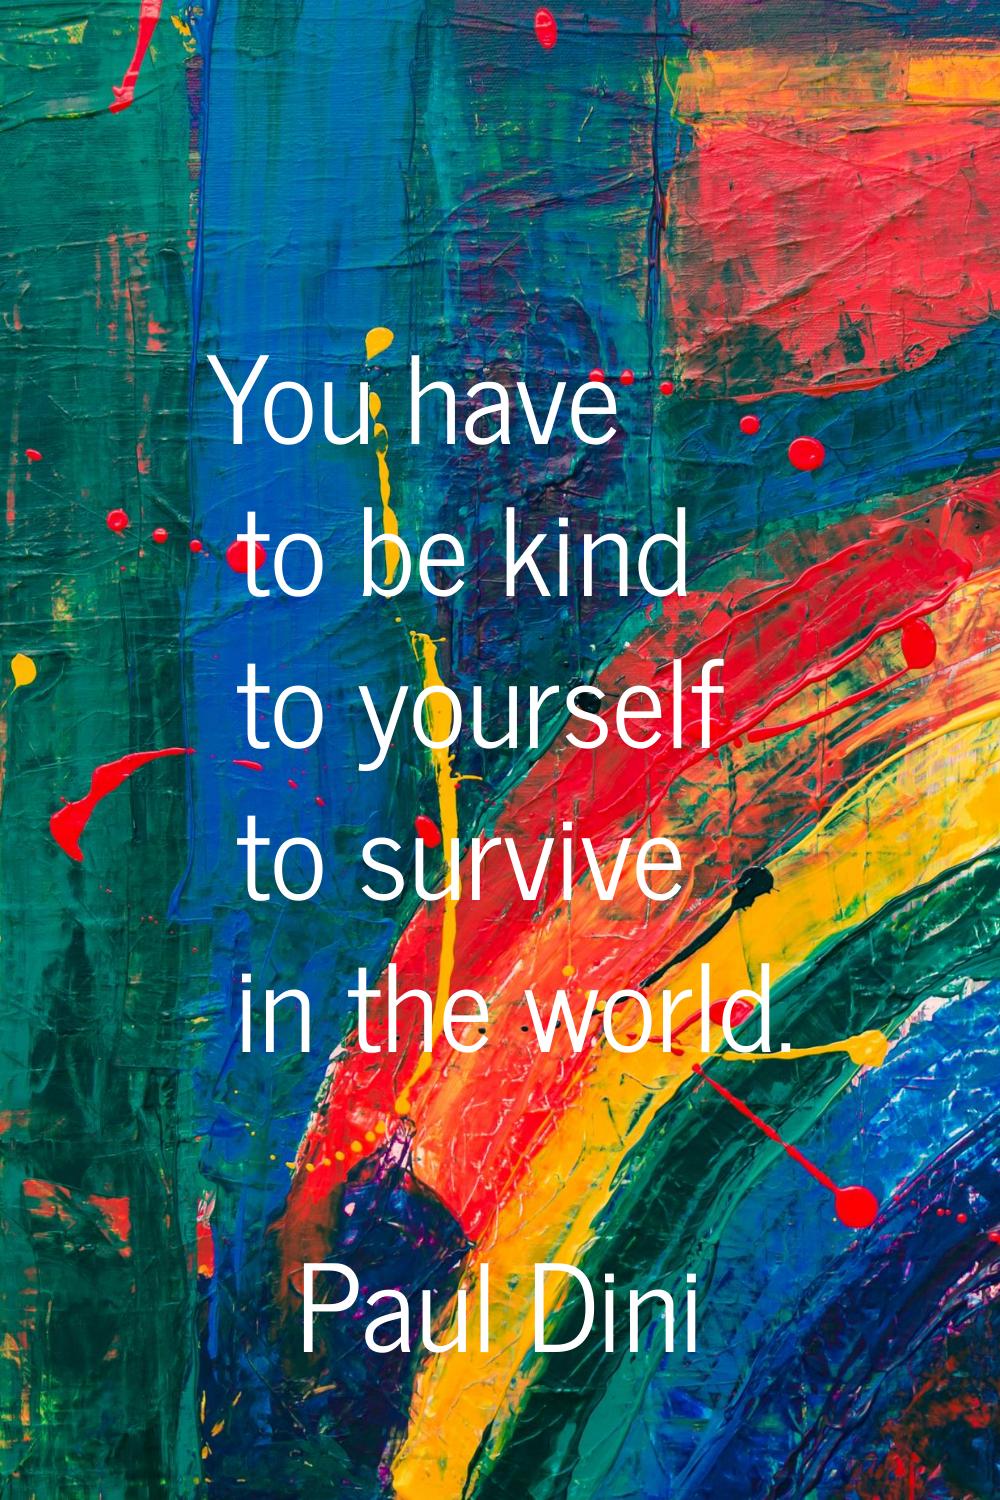 You have to be kind to yourself to survive in the world.